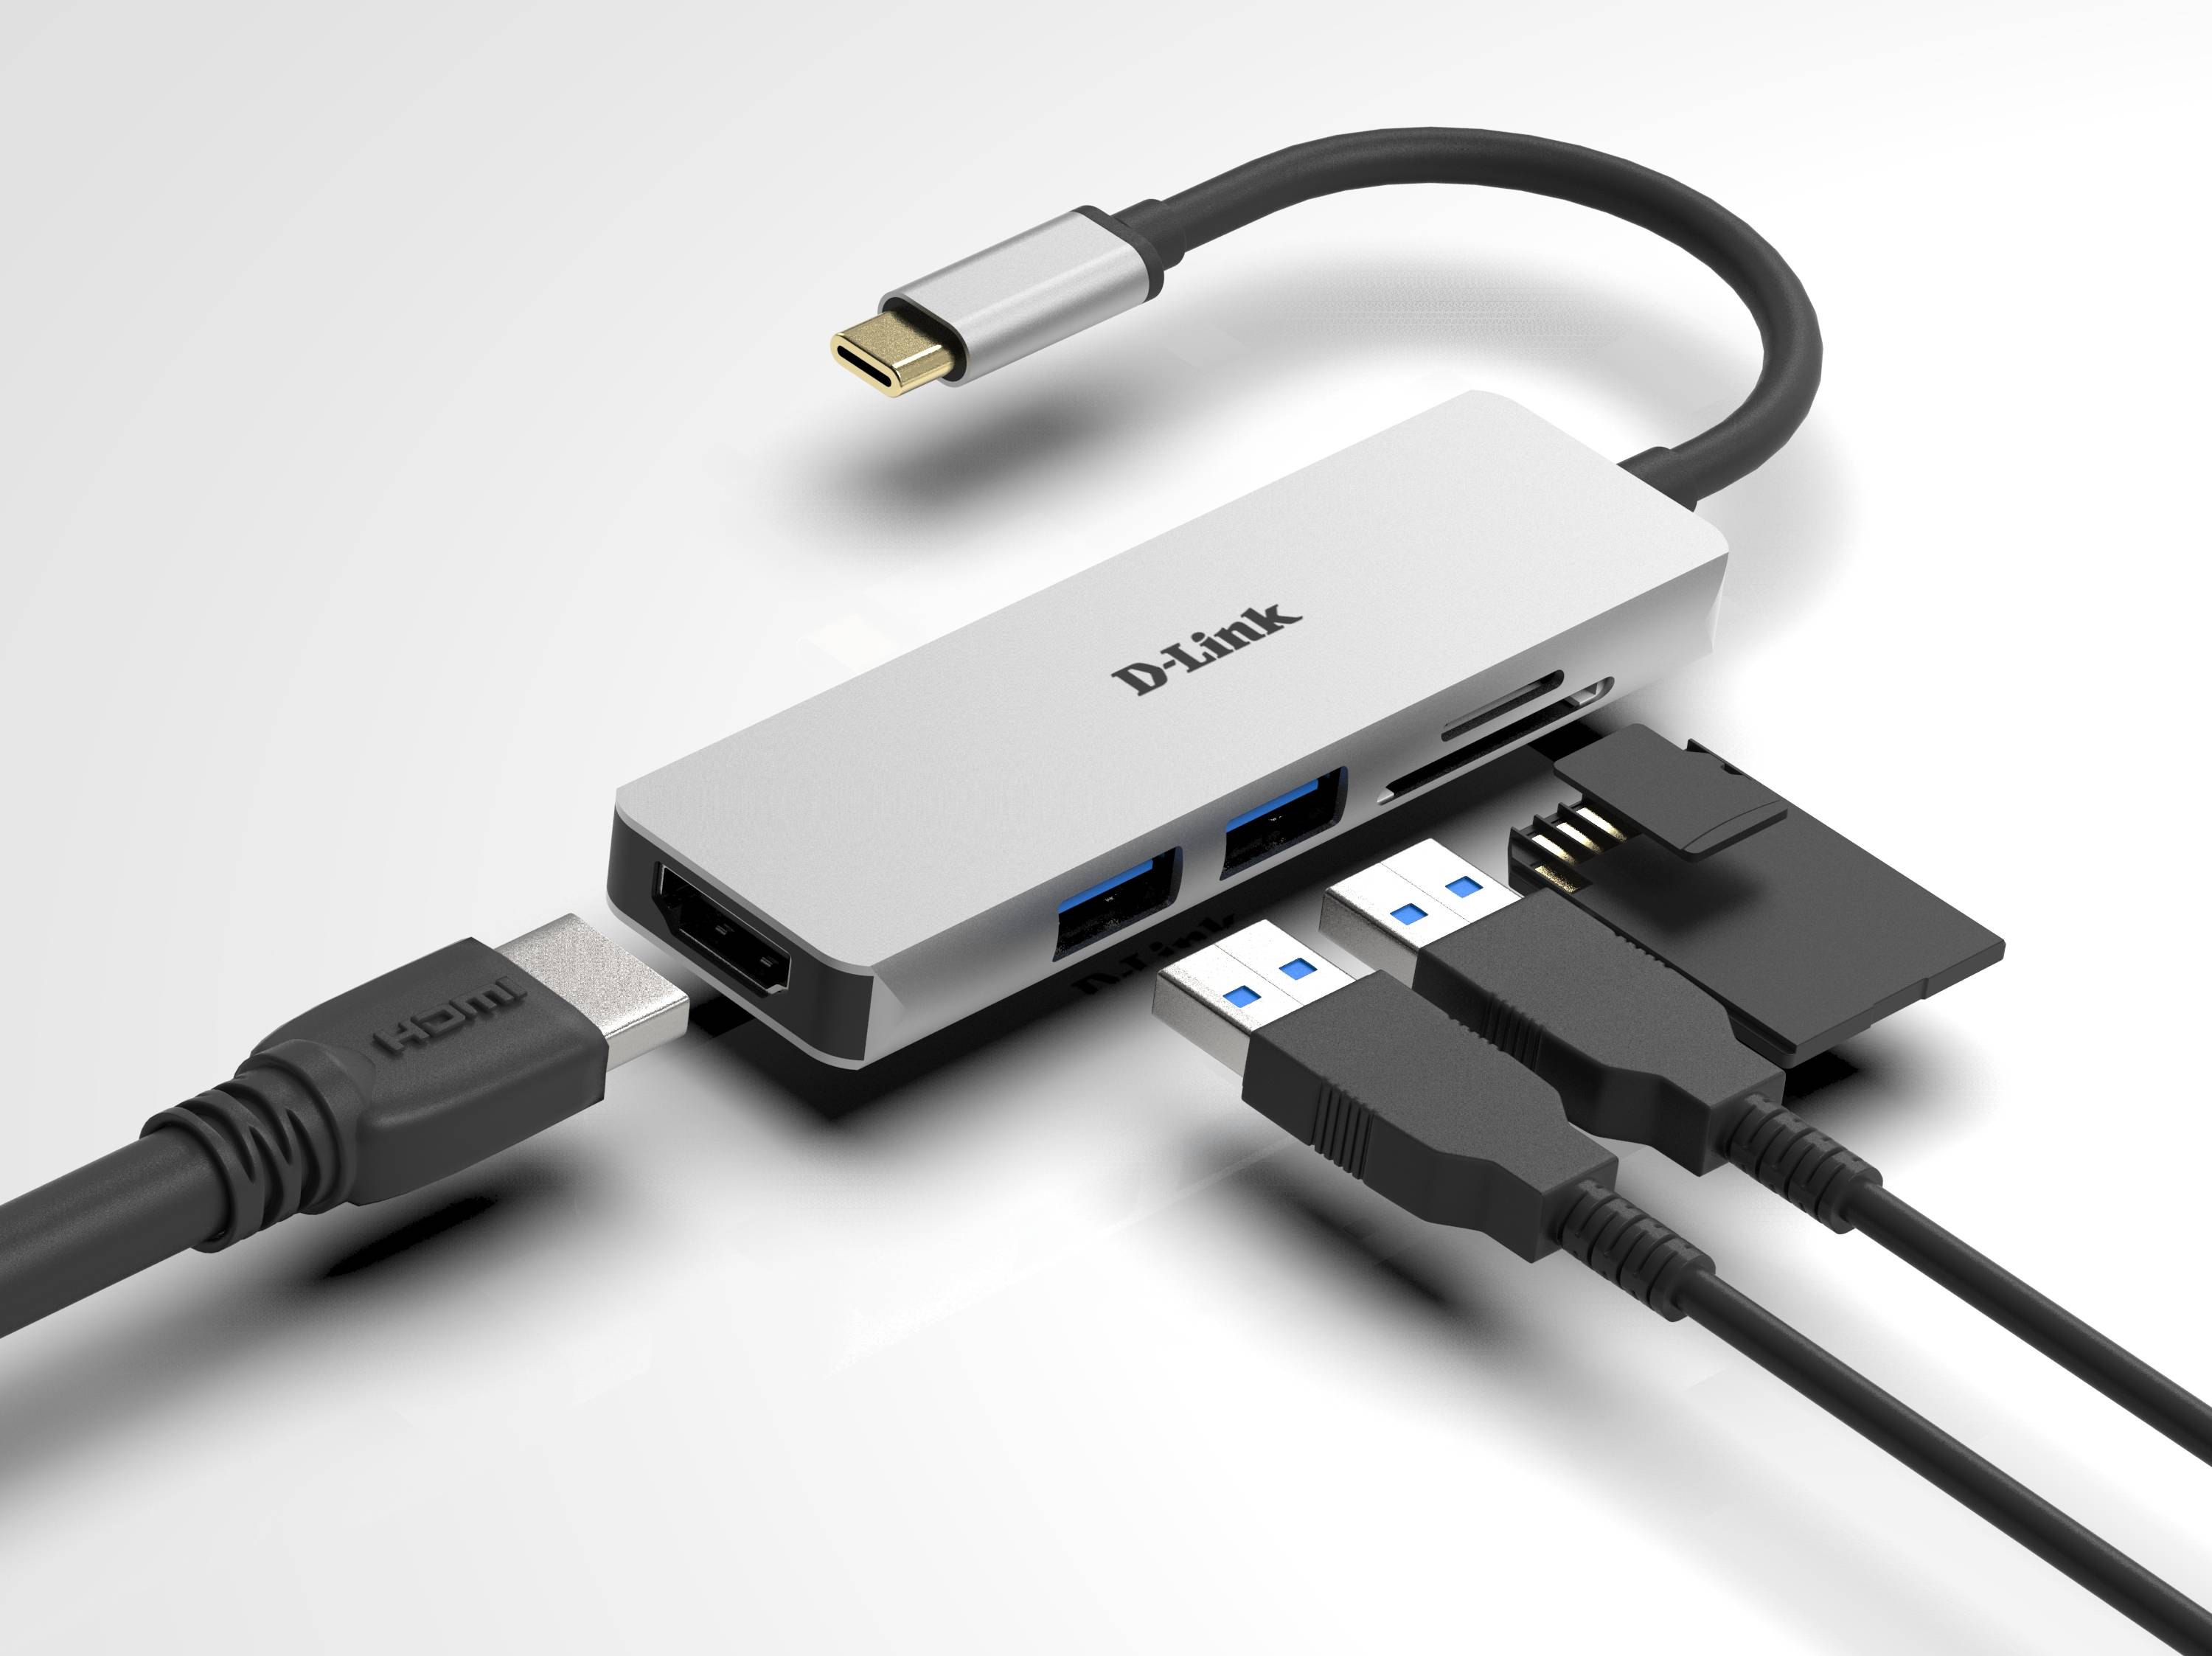 Rca Informatique - image du produit : 5-IN-1 USB-C HUB WITH HDMI AND SD/MICROSD CARD READER